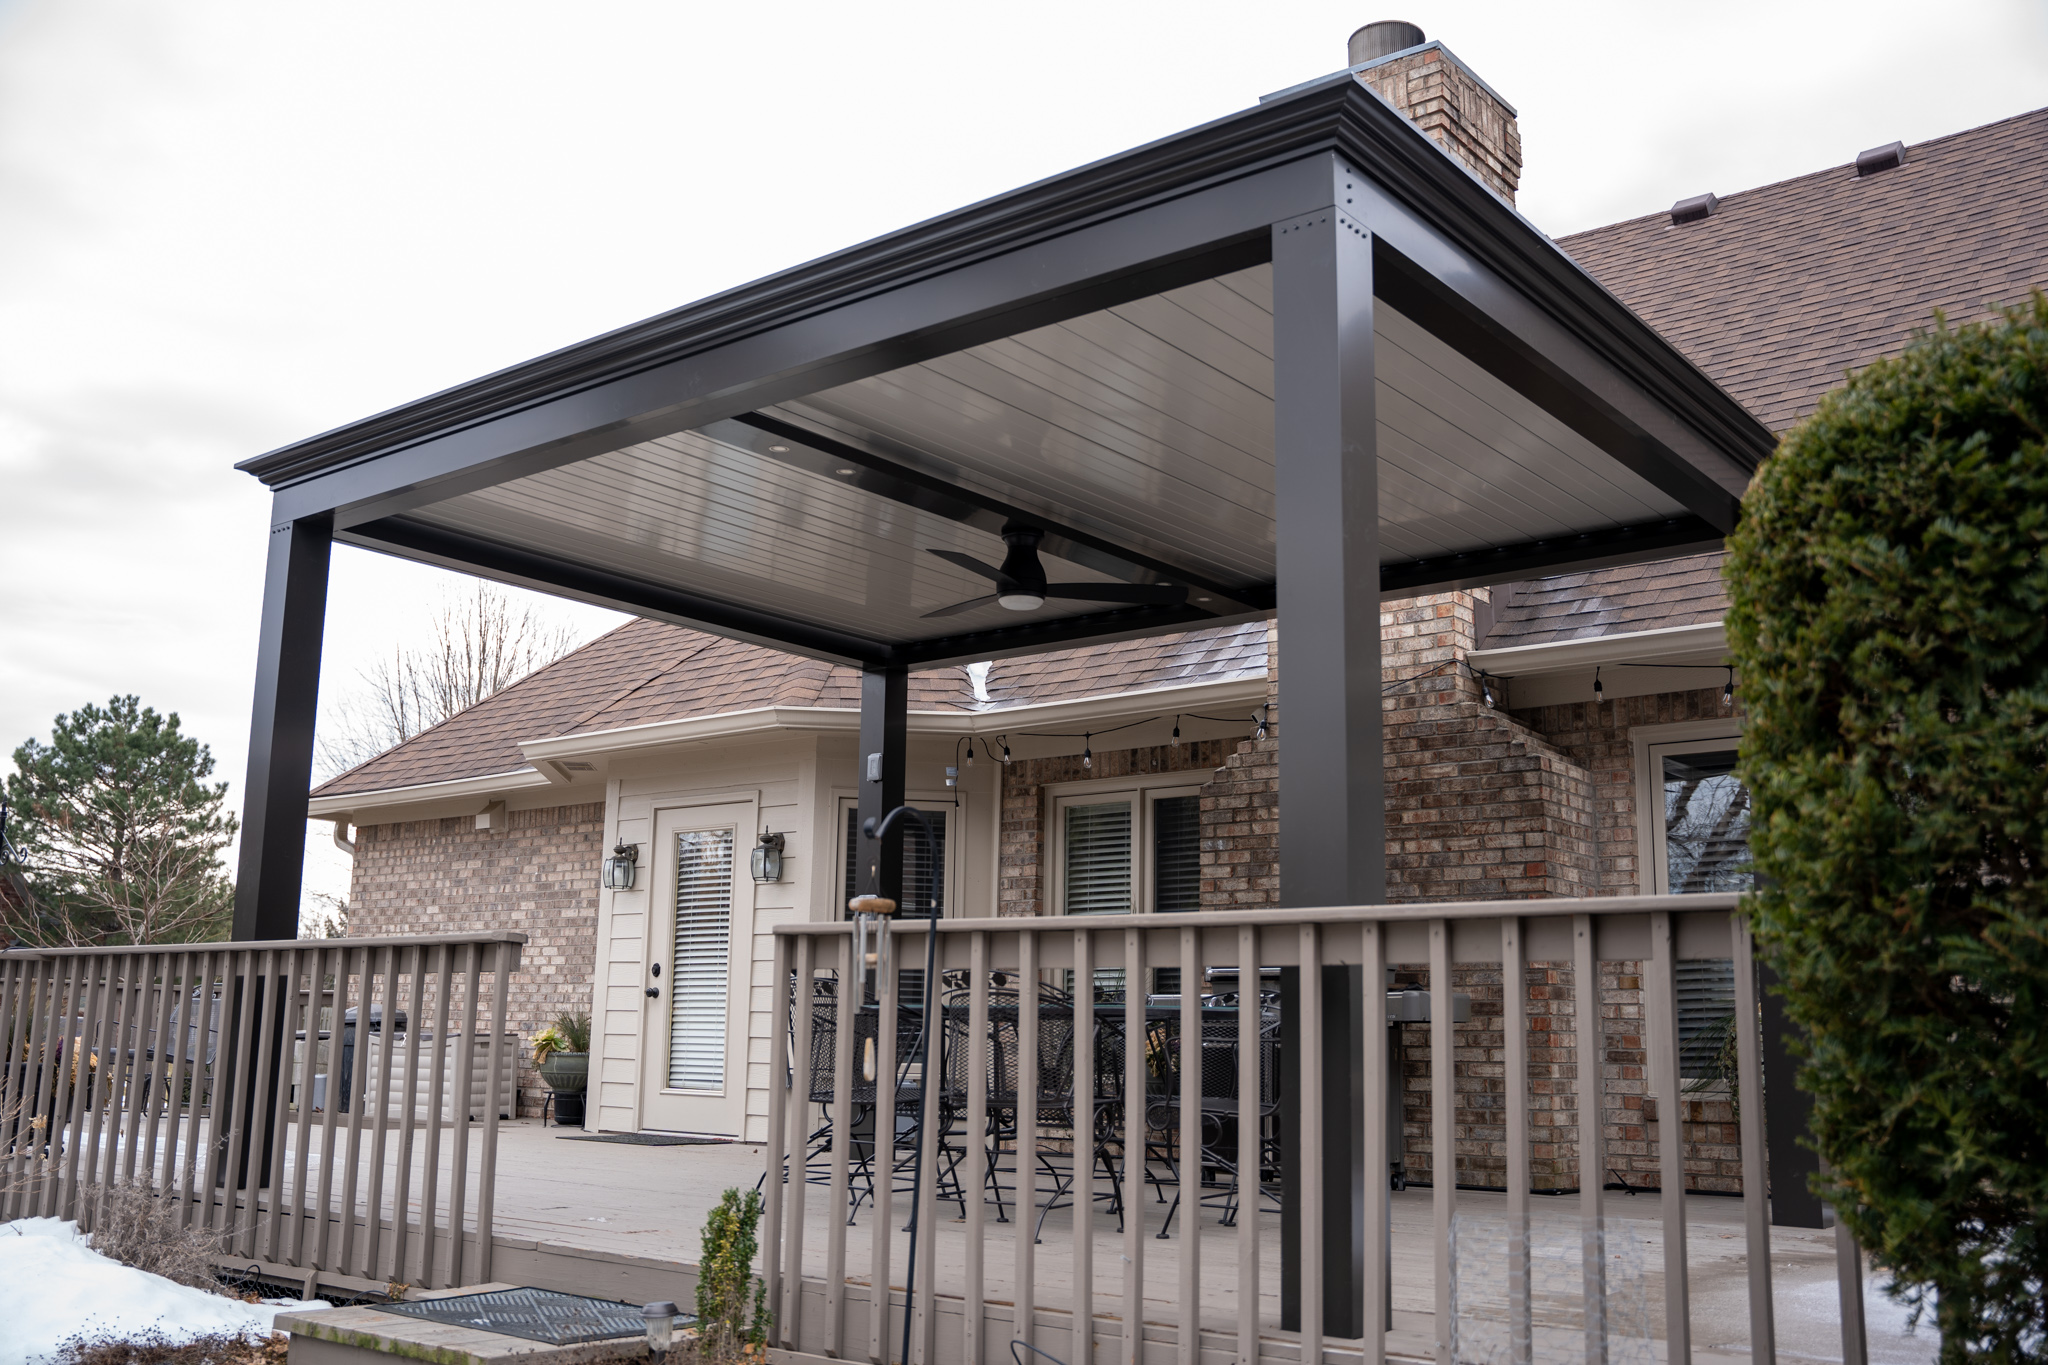 Add Value with pergolas and get that return on investment that many homeowners hope they get with their money spent